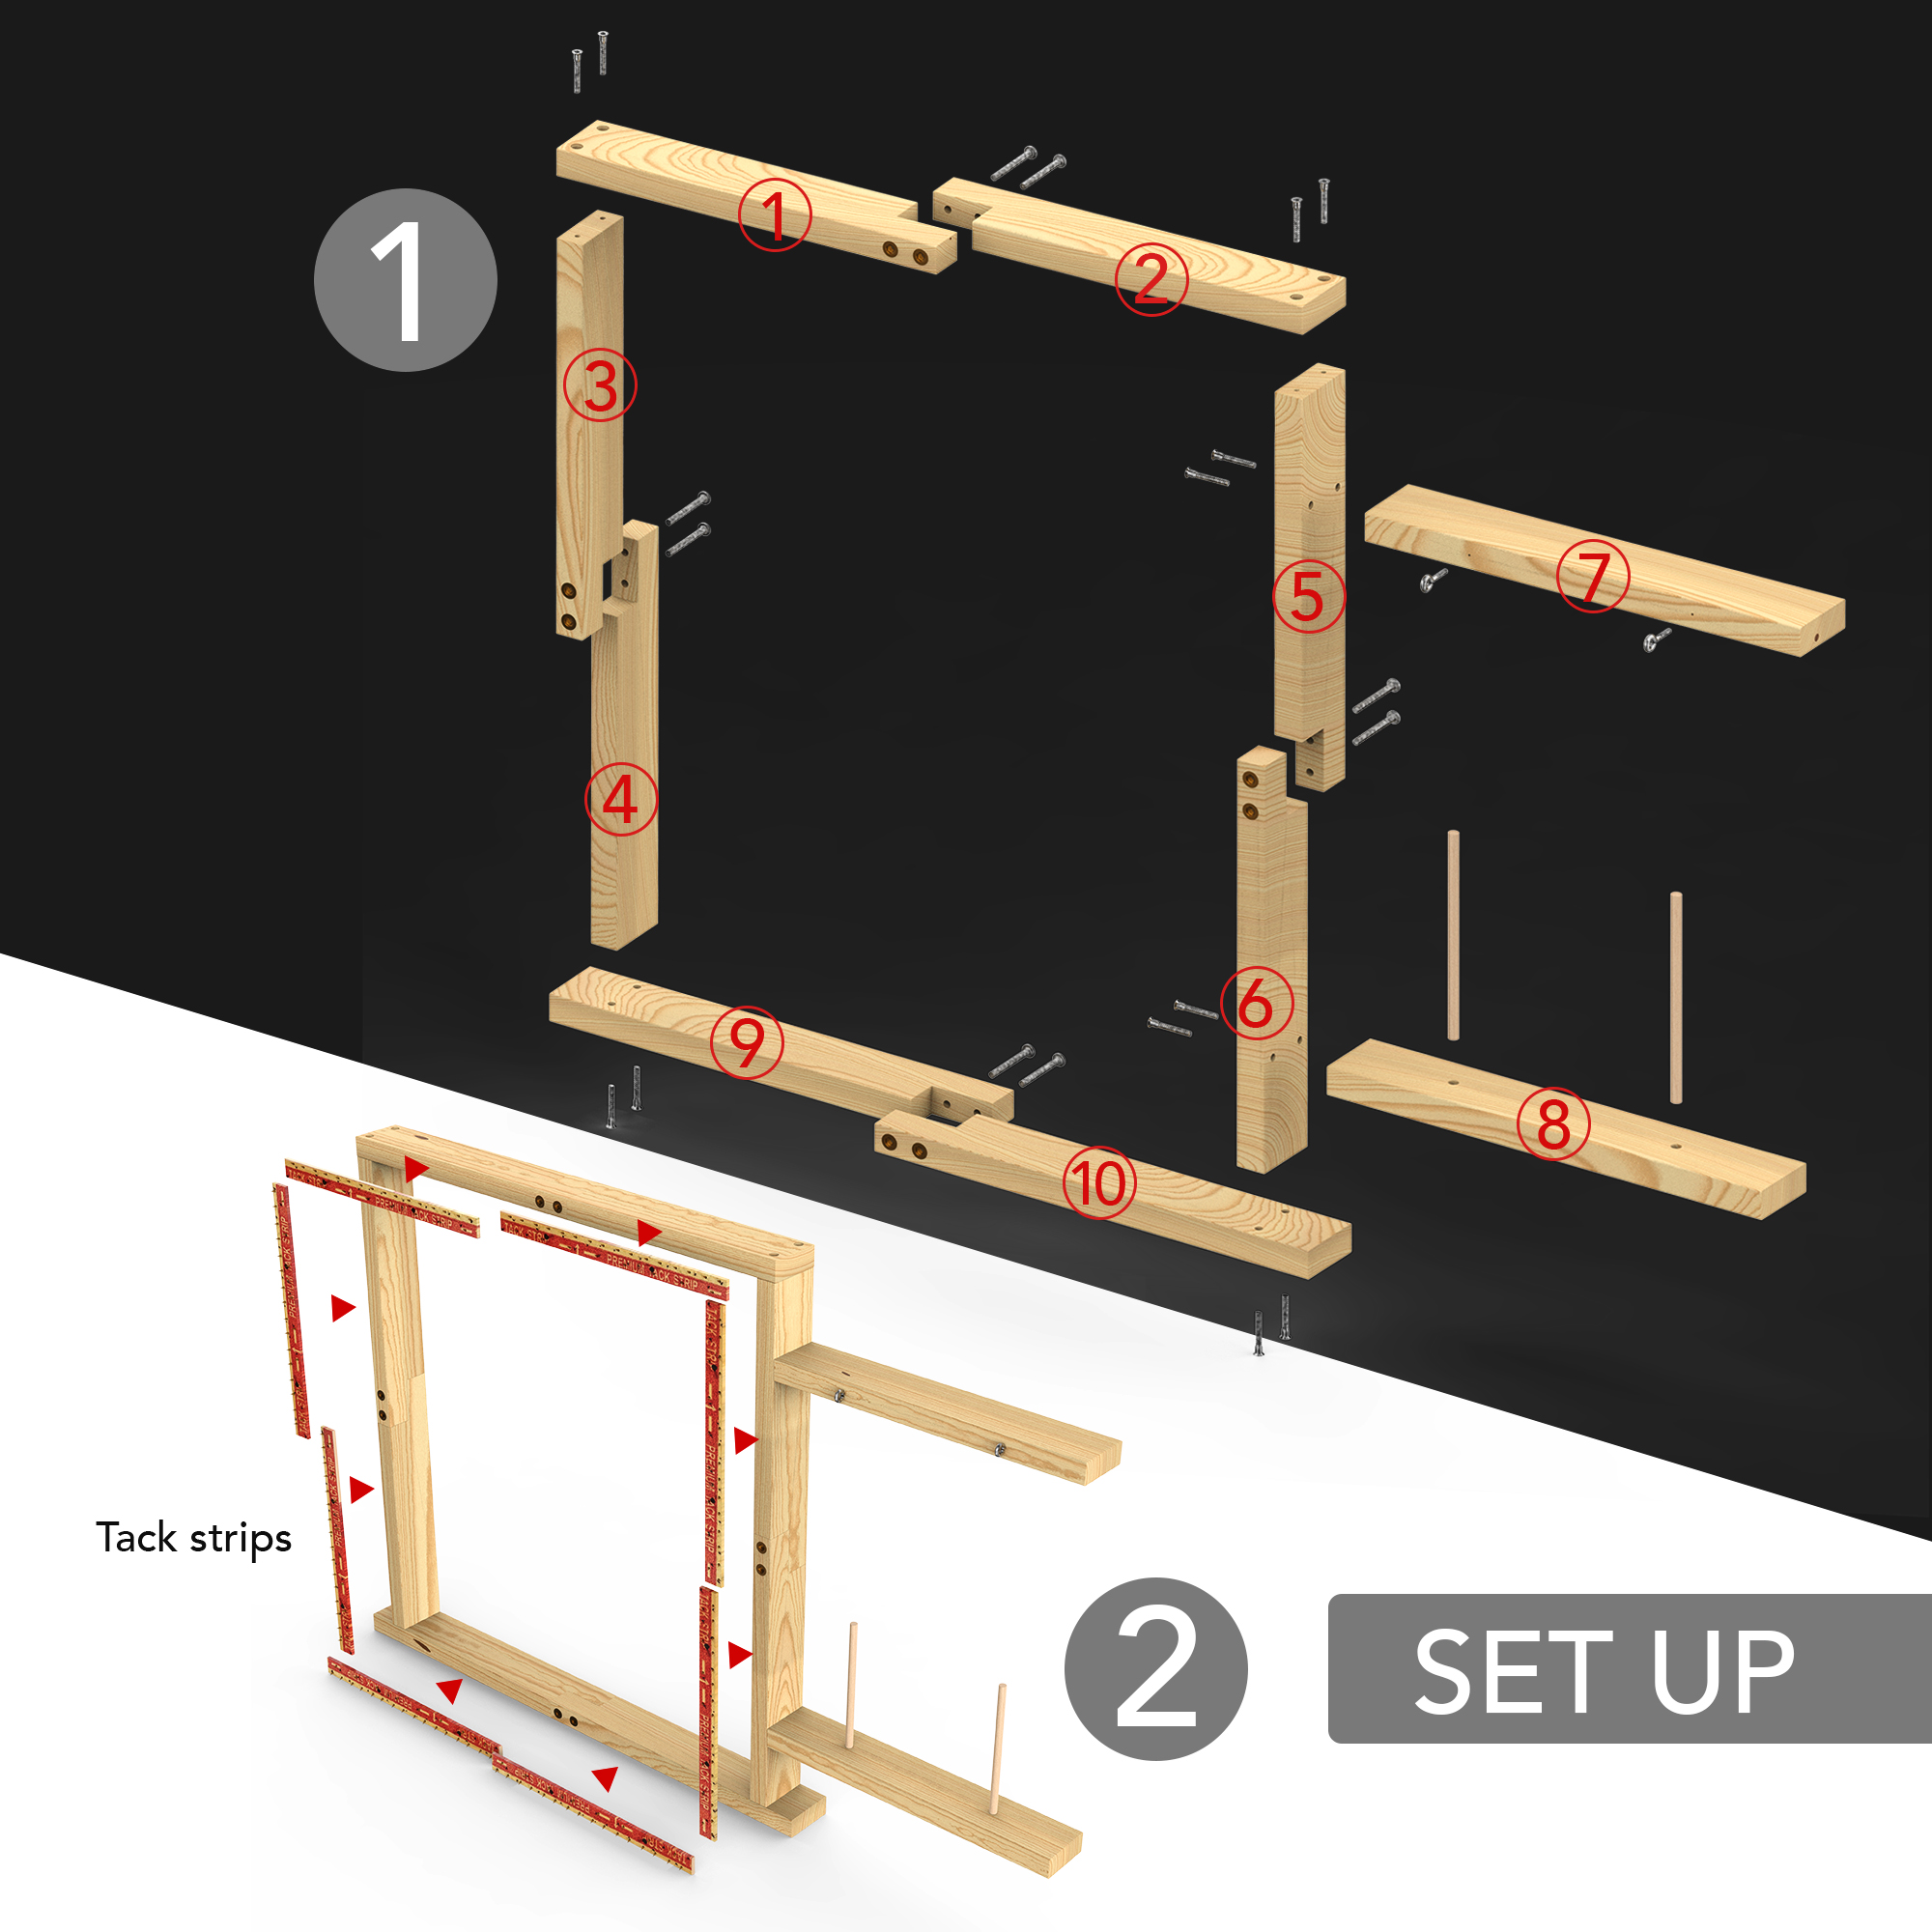 Collapsible Tufting Frame Parts List : r/Tufting